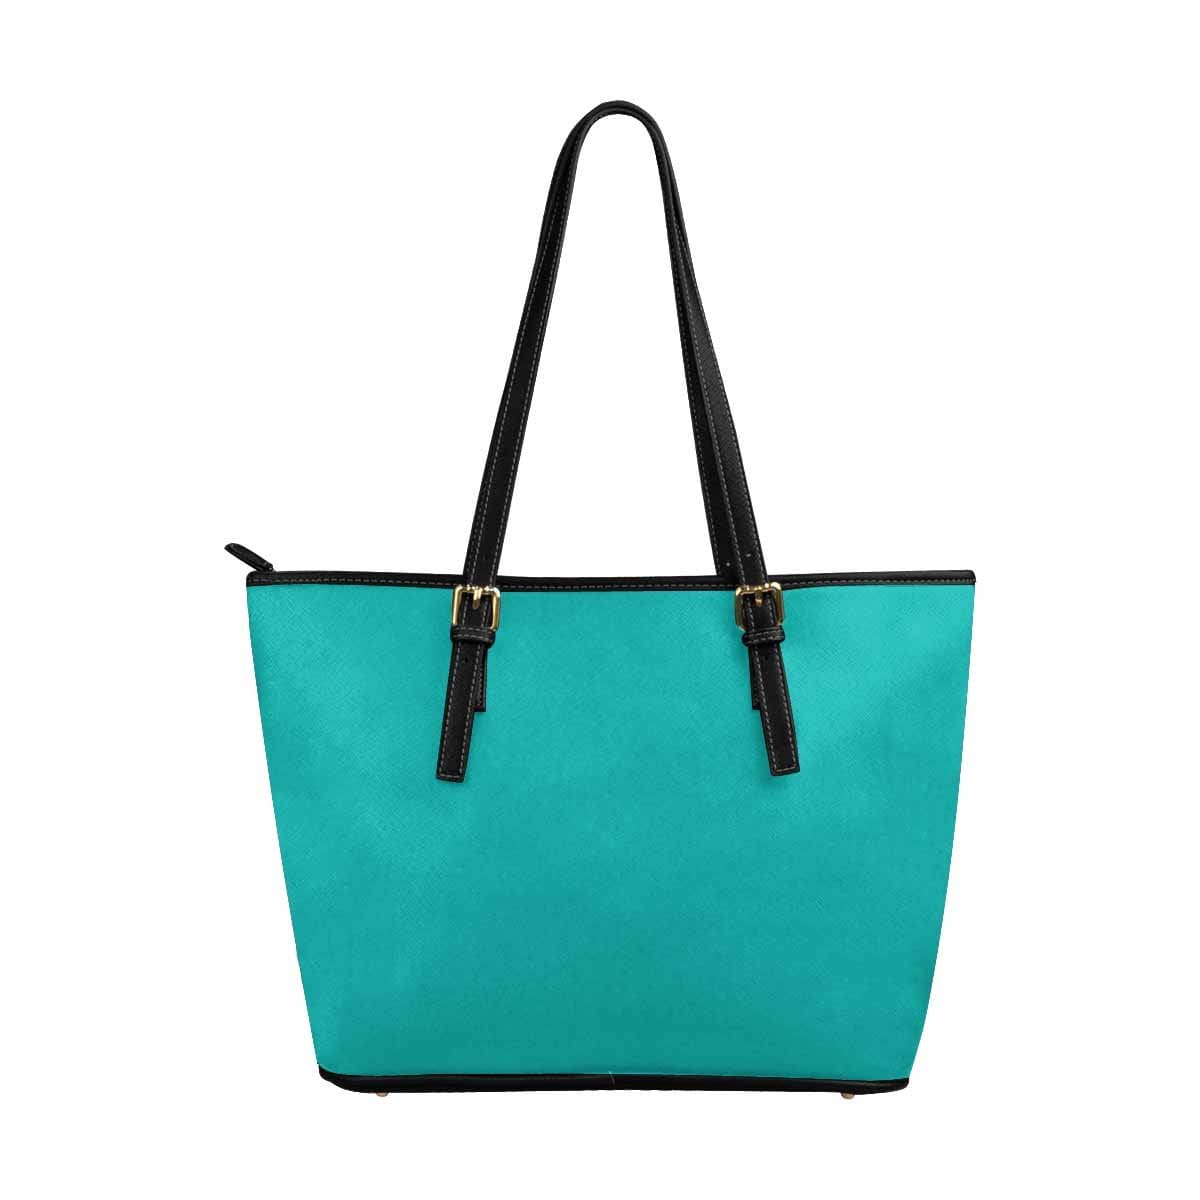 Greenish Blue - Large Leather Tote Bag with Zipper